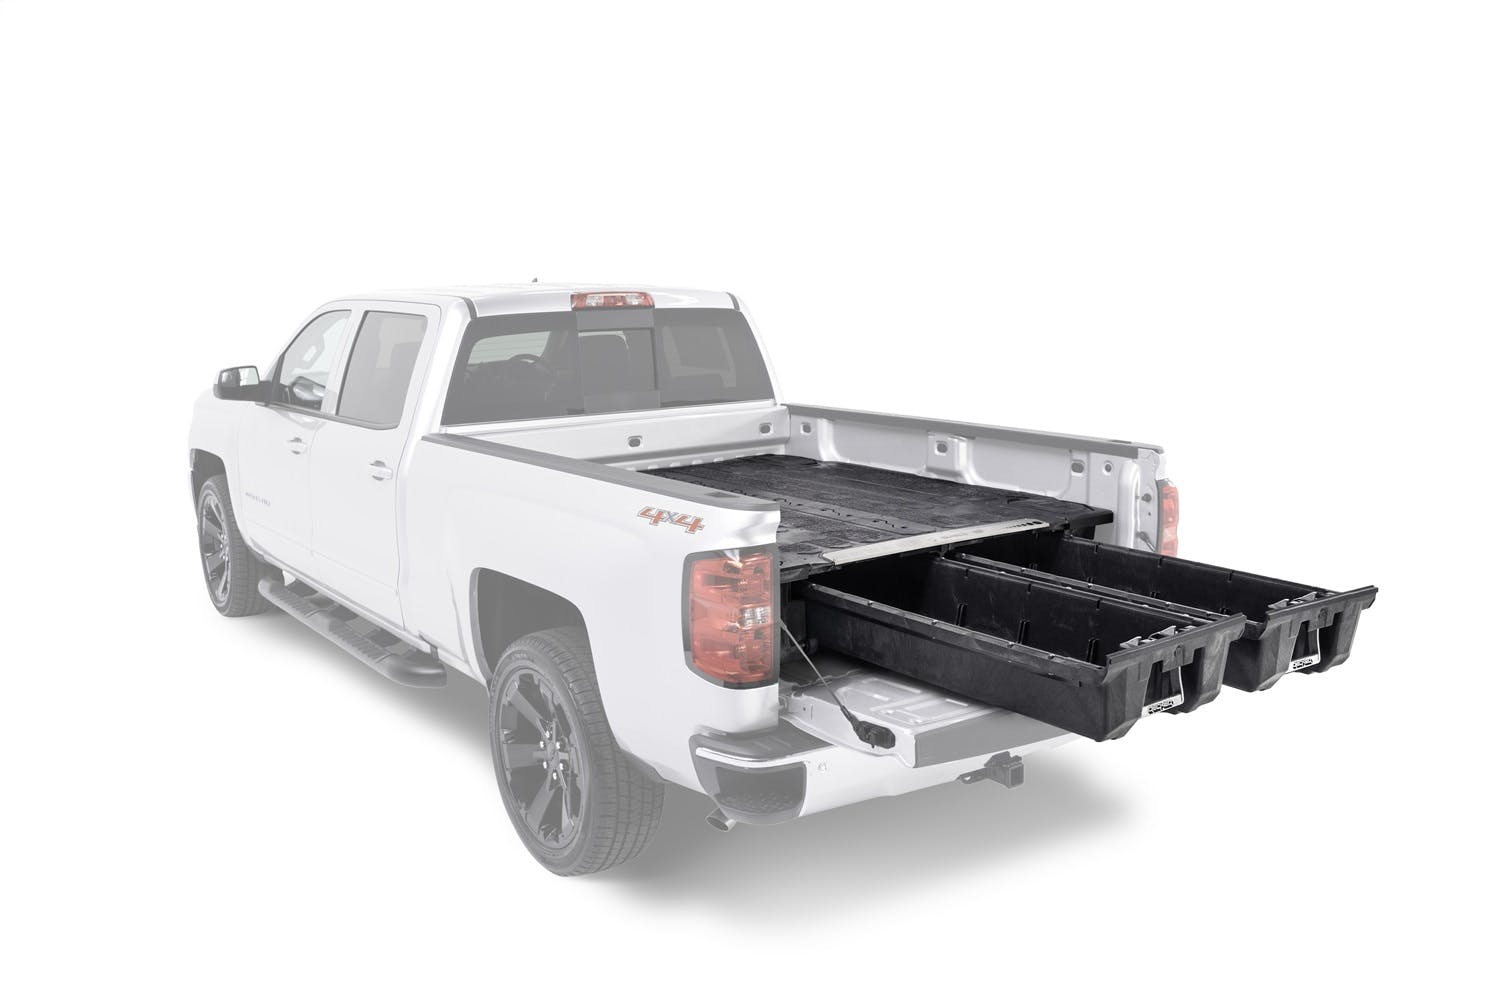 DECKED DR1 75.25 Two Drawer Storage System for A Full Size Pick Up Truck